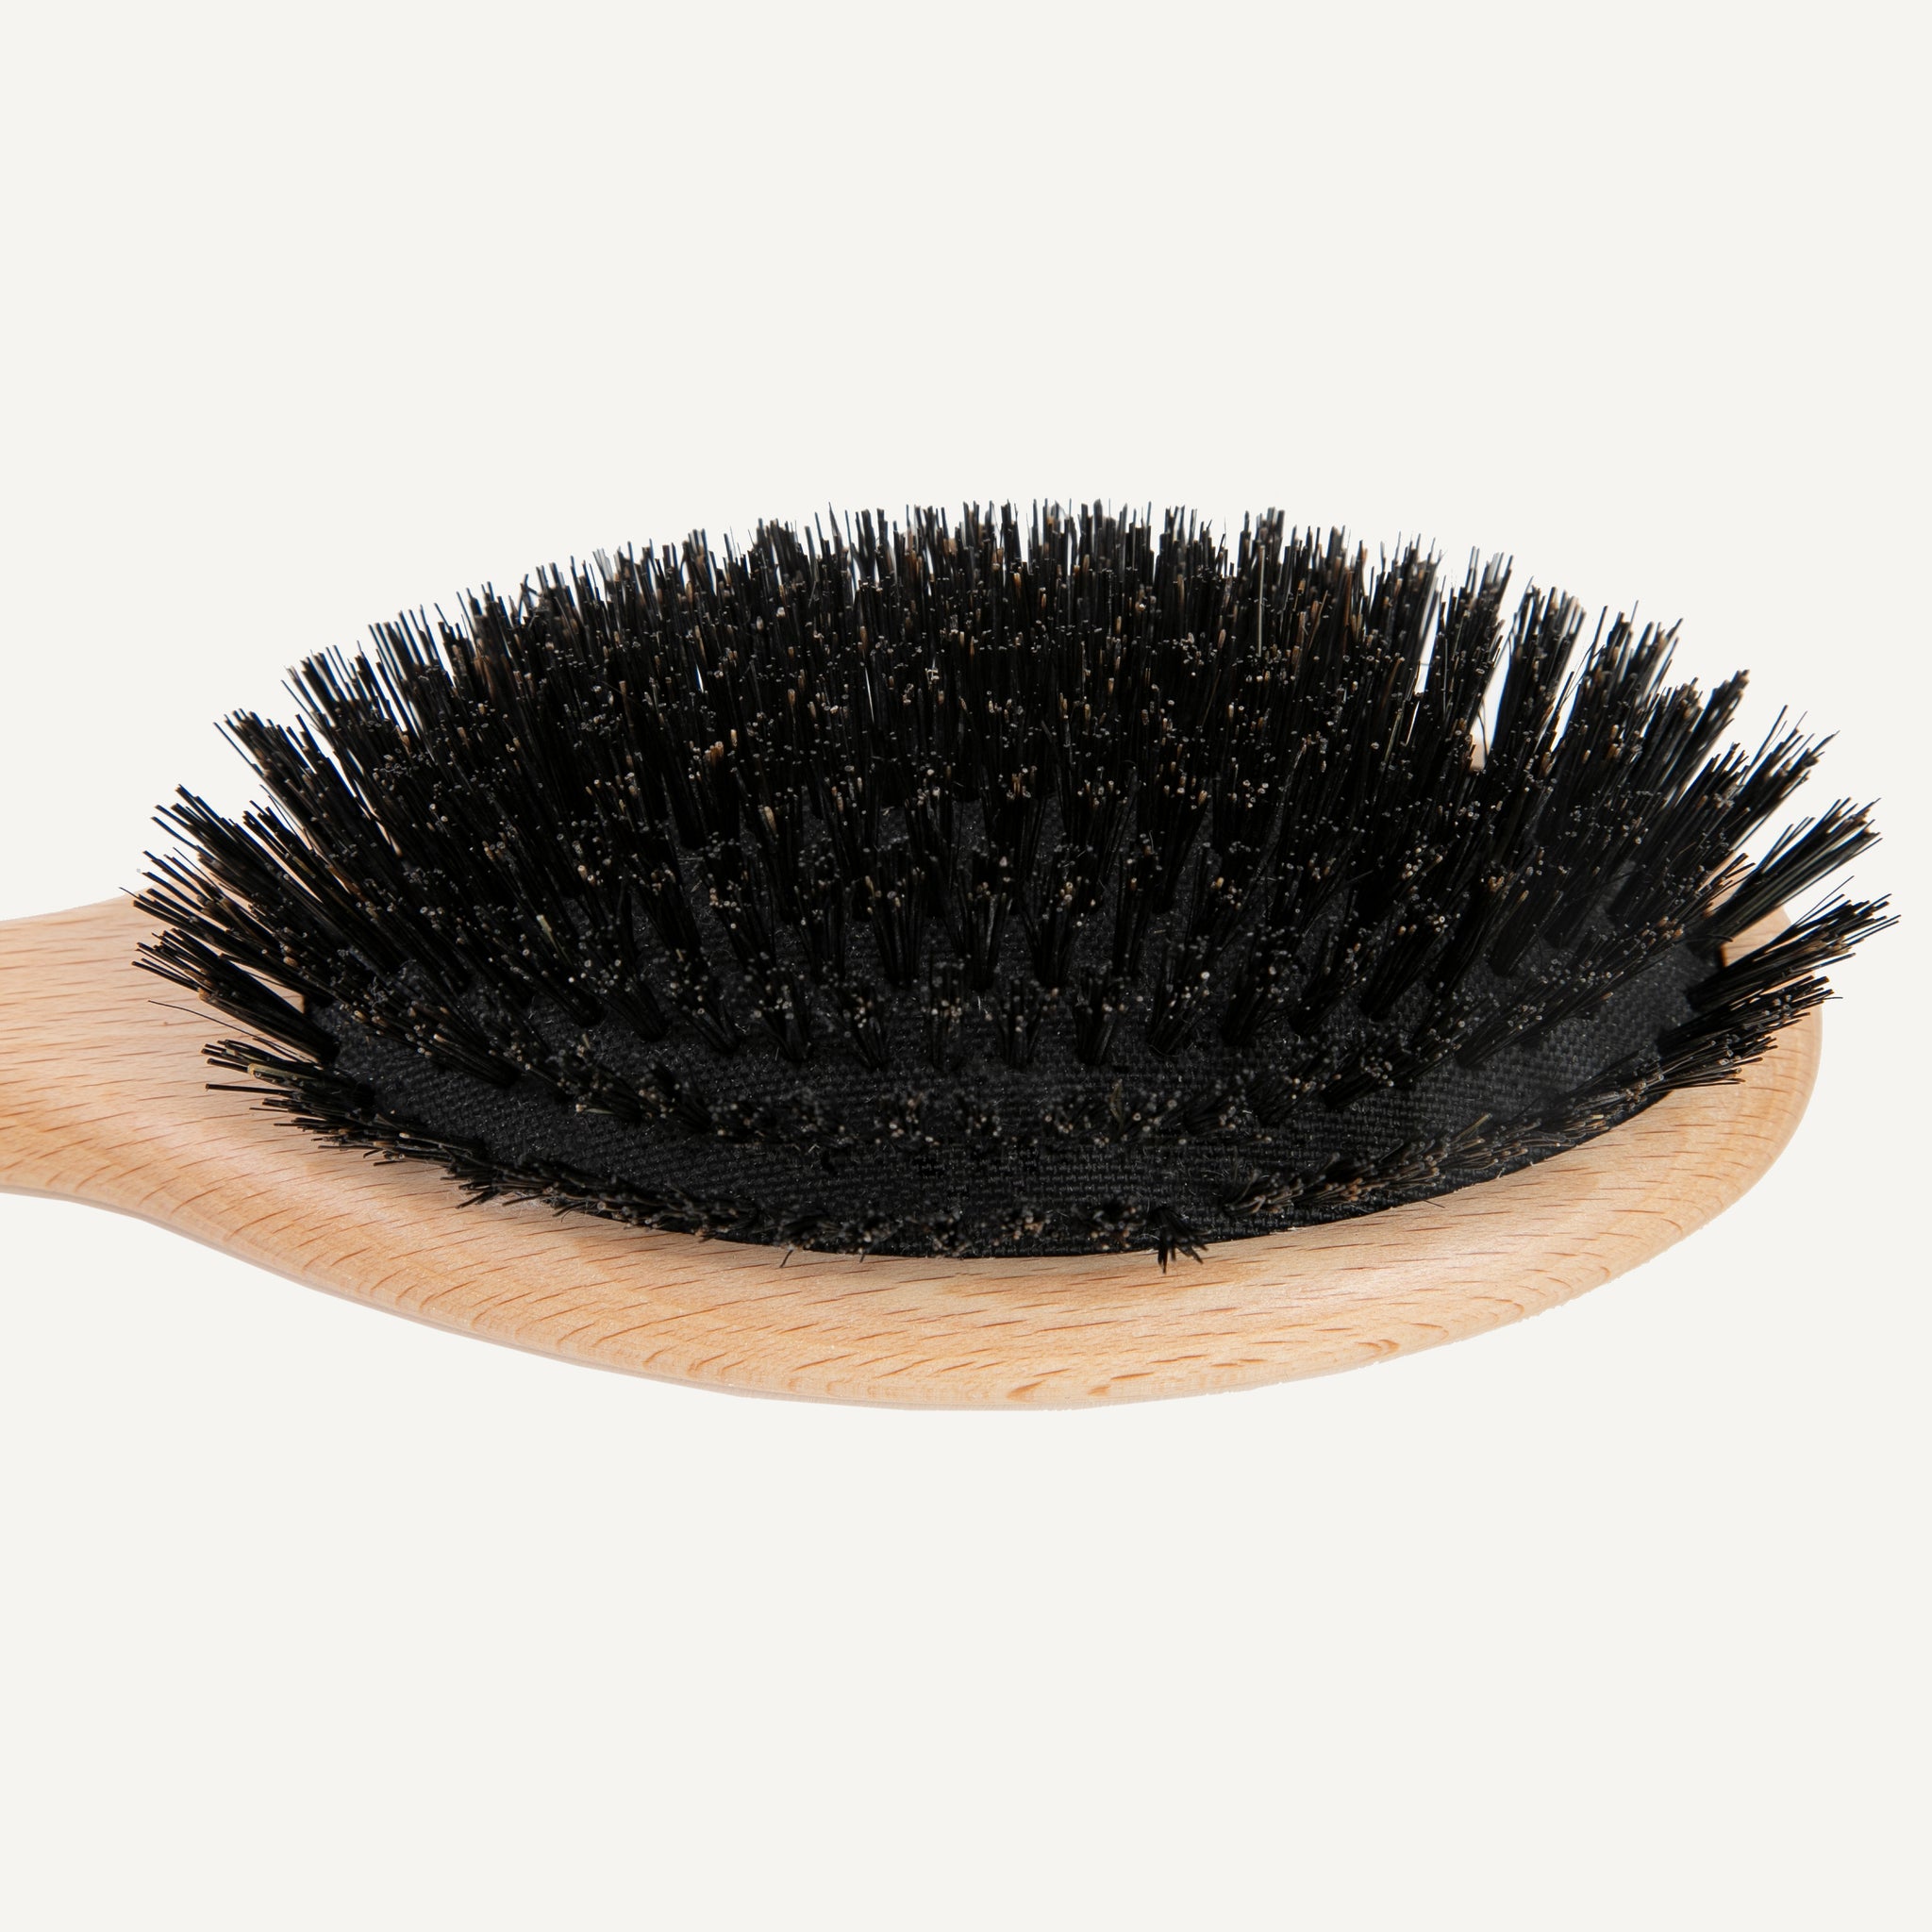 HAIR BRUSH WITH NATURAL BRISTLE